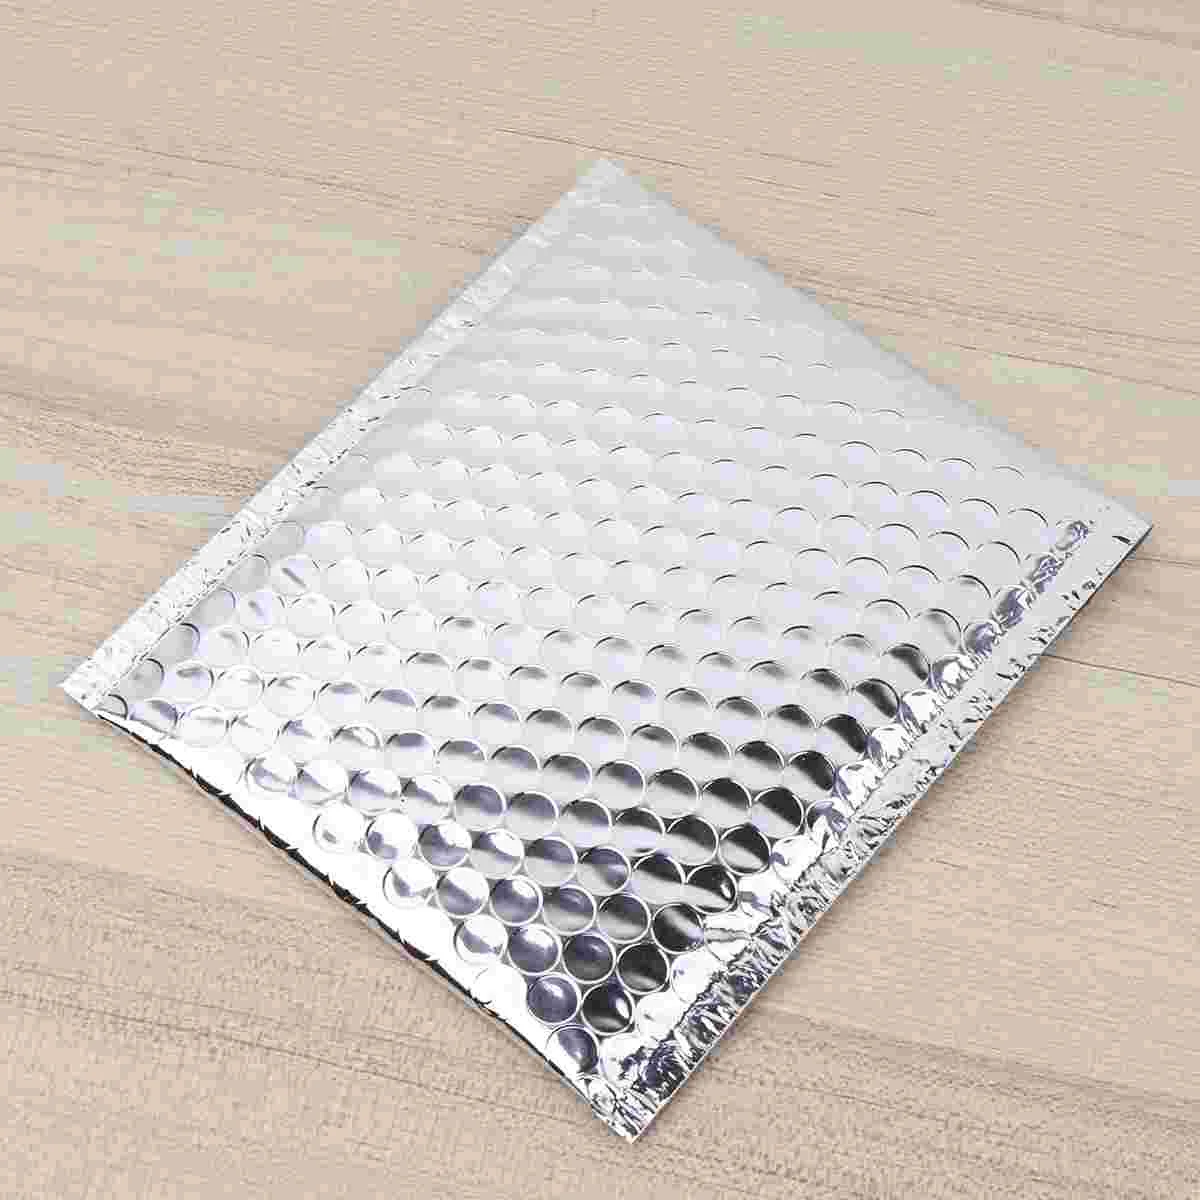 28 Pcs Bubble Bag Shockproof Packaging Metal Small Envelope Waterproof Logistic Express 50pcs white bag foam envelope foam foil office packaging envelope moistureproof vibration bag bubble envelope mailing bags